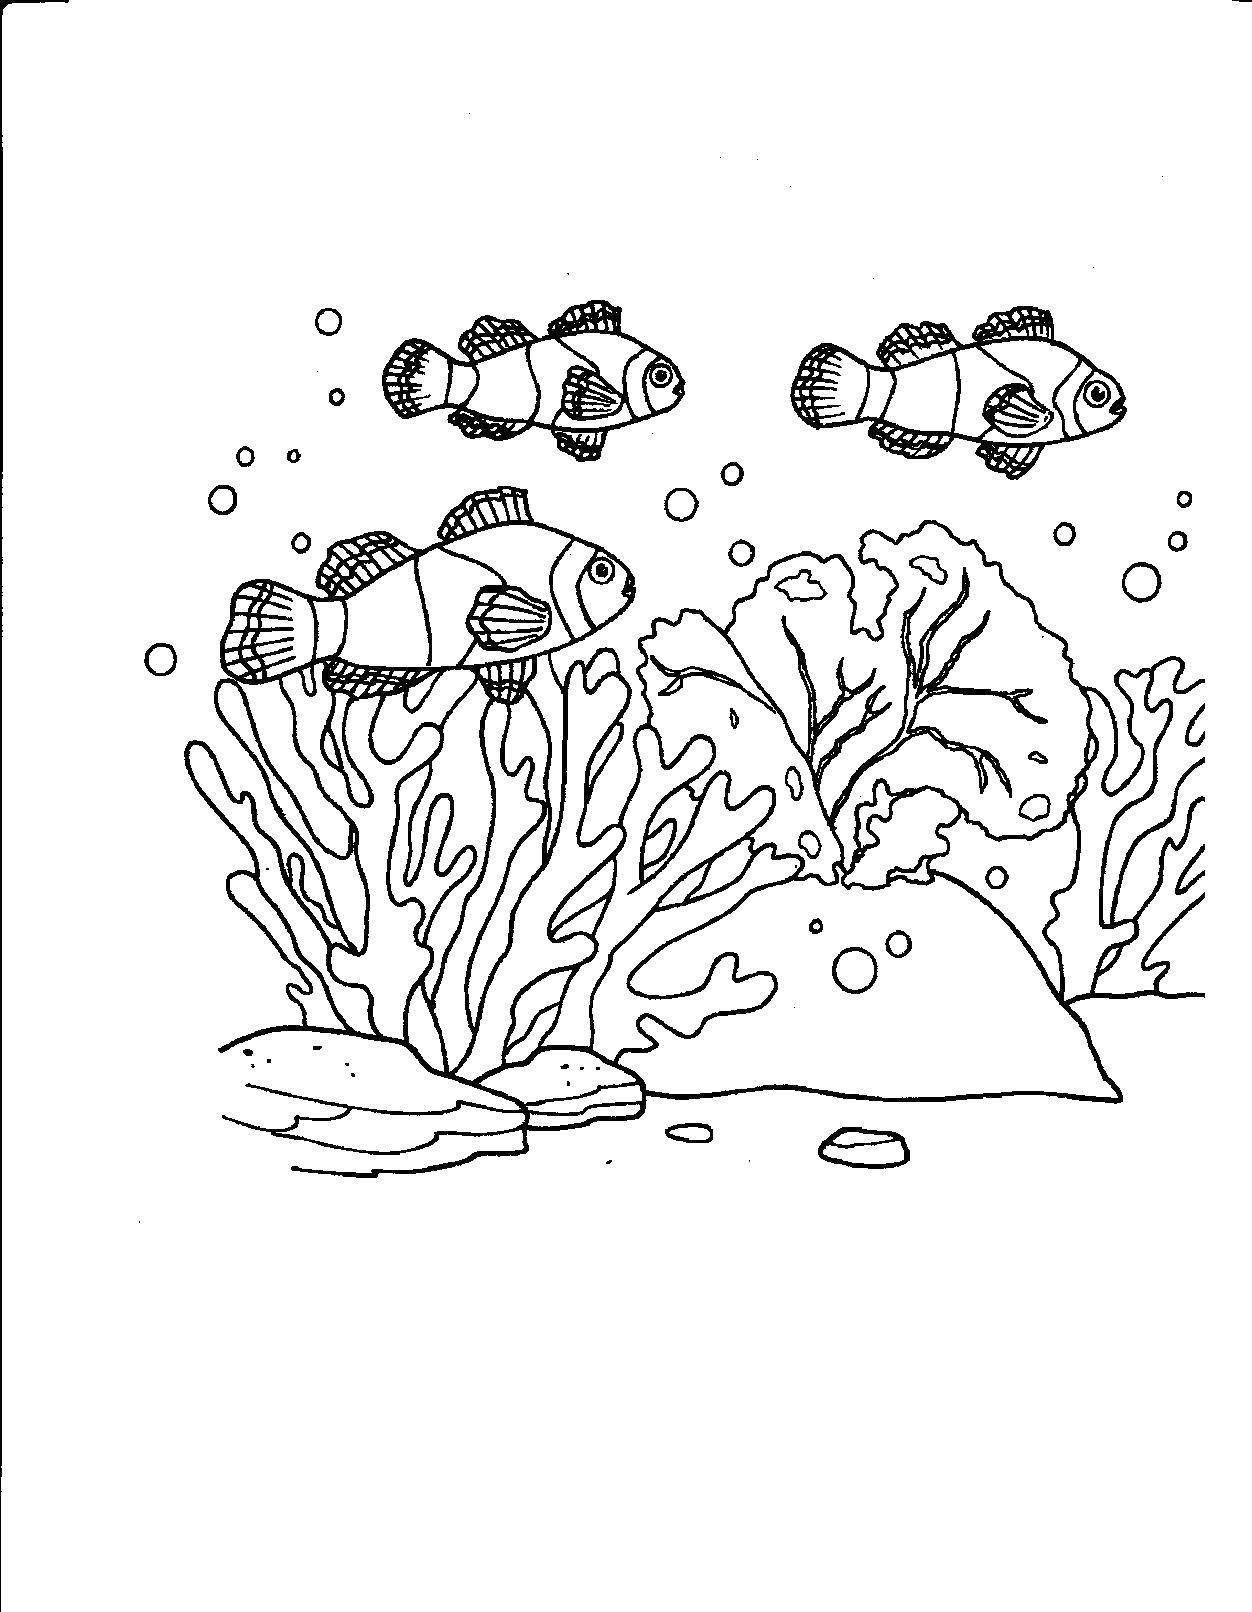 Coloring Clown fish. Category Marine animals. Tags:  Underwater world, fish.